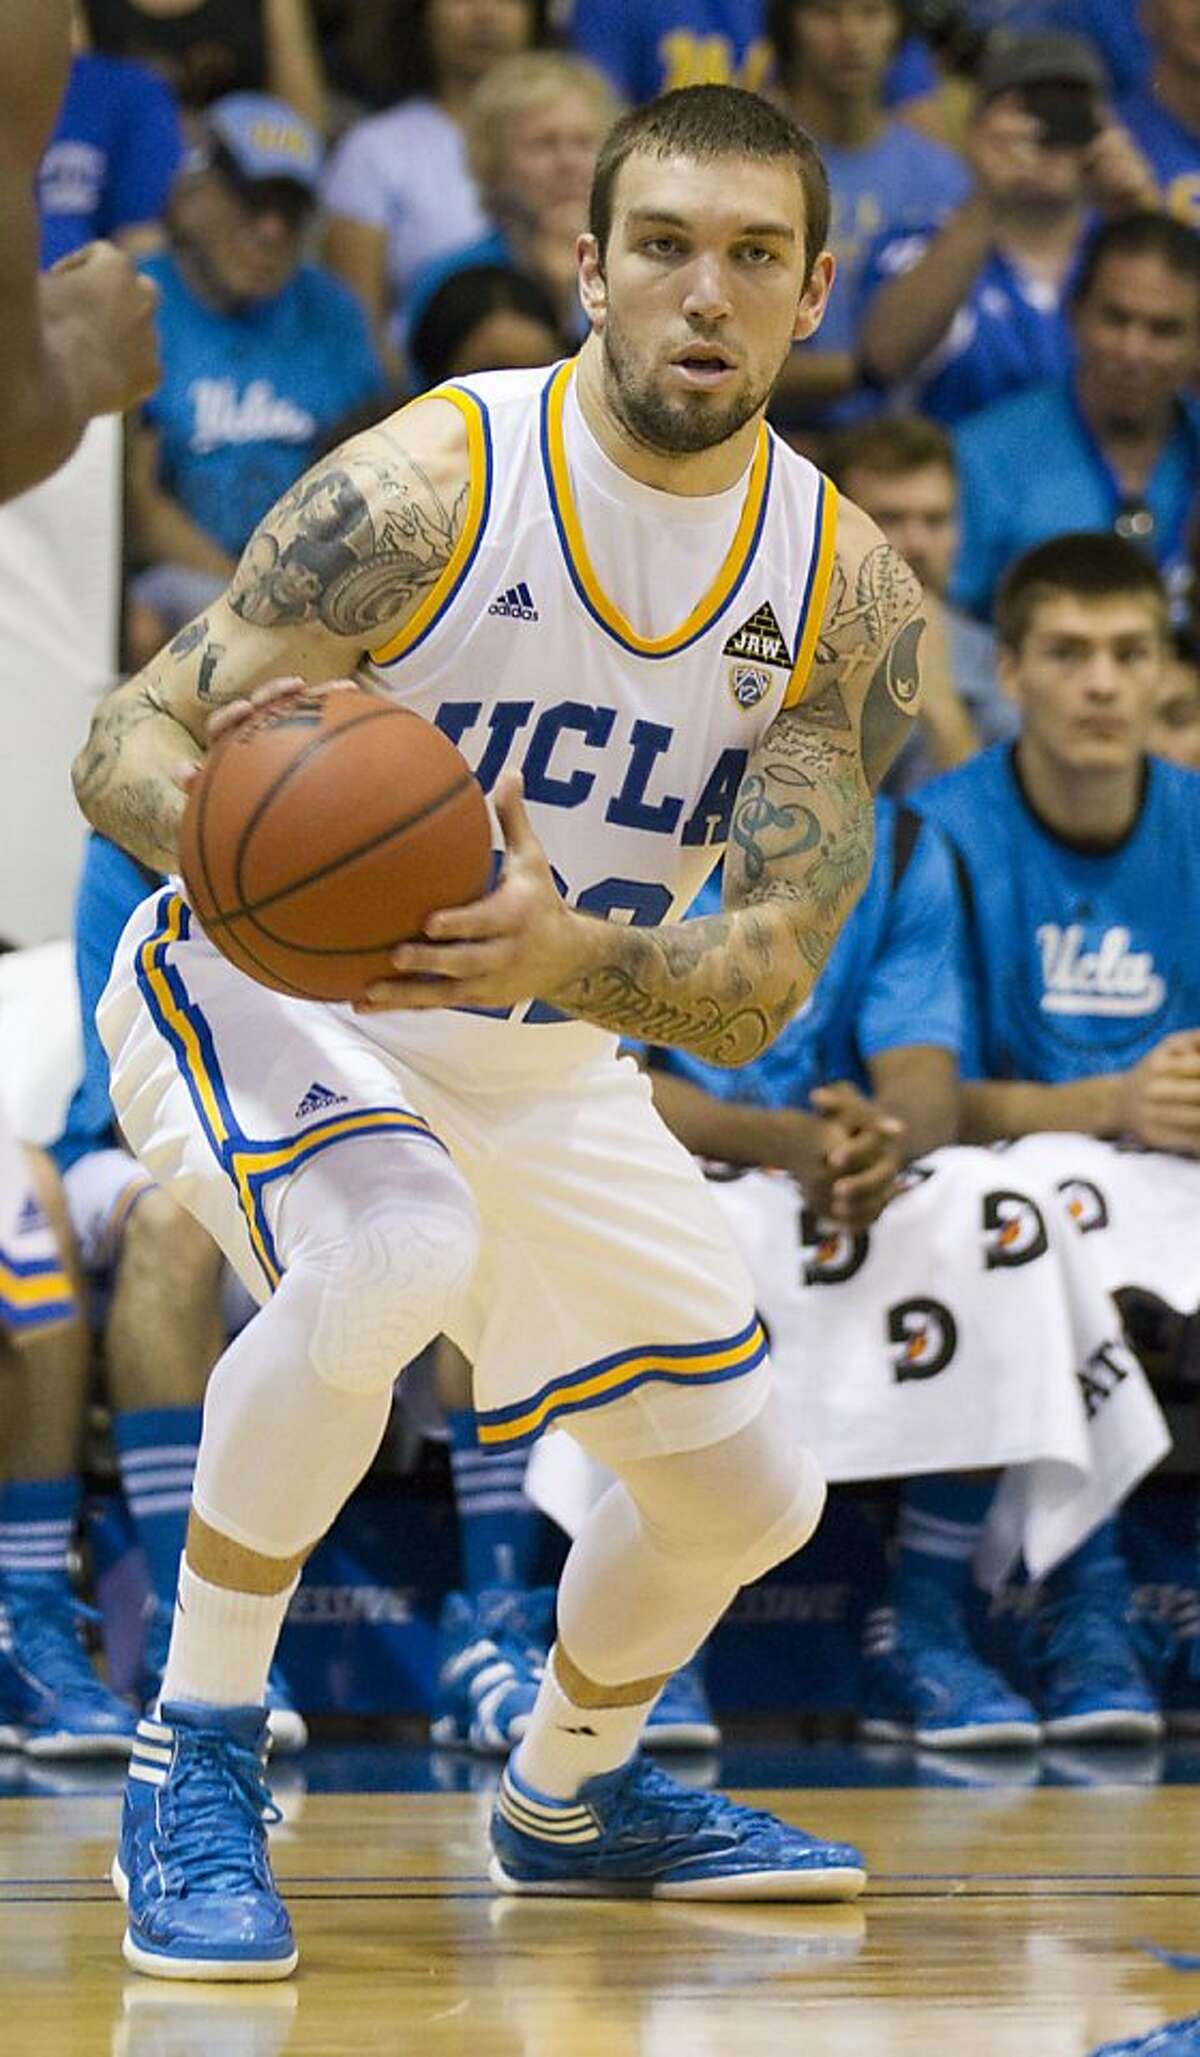 In this Nov. 21, 2011, photo, UCLA forward Reeves Nelson looks for an open teammate during an NCAA college basketball game against Chaminade in Lahaina, Hawaii. Nelson has been suspended indefinitely for a second time from the UCLA basketball team, a situation that coach Ben Howland described Tuesday, Dec. 6, 2011, as "very difficult." (AP Photo/Eugene Tanner) Ran on: 12-10-2011 Photo caption Dummy text goes here. Dummy text goes here. Dummy text goes here. Dummy text goes here. Dummy text goes here. Dummy text goes here. Dummy text goes here. Dummy text goes here.###Photo: names10_PHnelson1321747200FR168001 AP###Live Caption:In this Nov. 21, 2011, photo, UCLA forward Reeves Nelson looks for an open teammate during an NCAA college basketball game against Chaminade in Lahaina, Hawaii. Nelson has been suspended indefinitely for a second time from the UCLA basketball team, a situation that coach Ben Howland described Tuesday, Dec. 6, 2011, as "very difficult."###Caption History:In this Nov. 21, 2011, photo, UCLA forward Reeves Nelson looks for an open teammate during an NCAA college basketball game against Chaminade in Lahaina, Hawaii. Nelson has been suspended indefinitely for a second time from the UCLA basketball team, a situation that coach Ben Howland described Tuesday, Dec. 6, 2011, as "very difficult." (AP Photo-Eugene Tanner)###Notes:Reeves Nelson###Special Instructions:NOV. 21, 2011, PHOTO